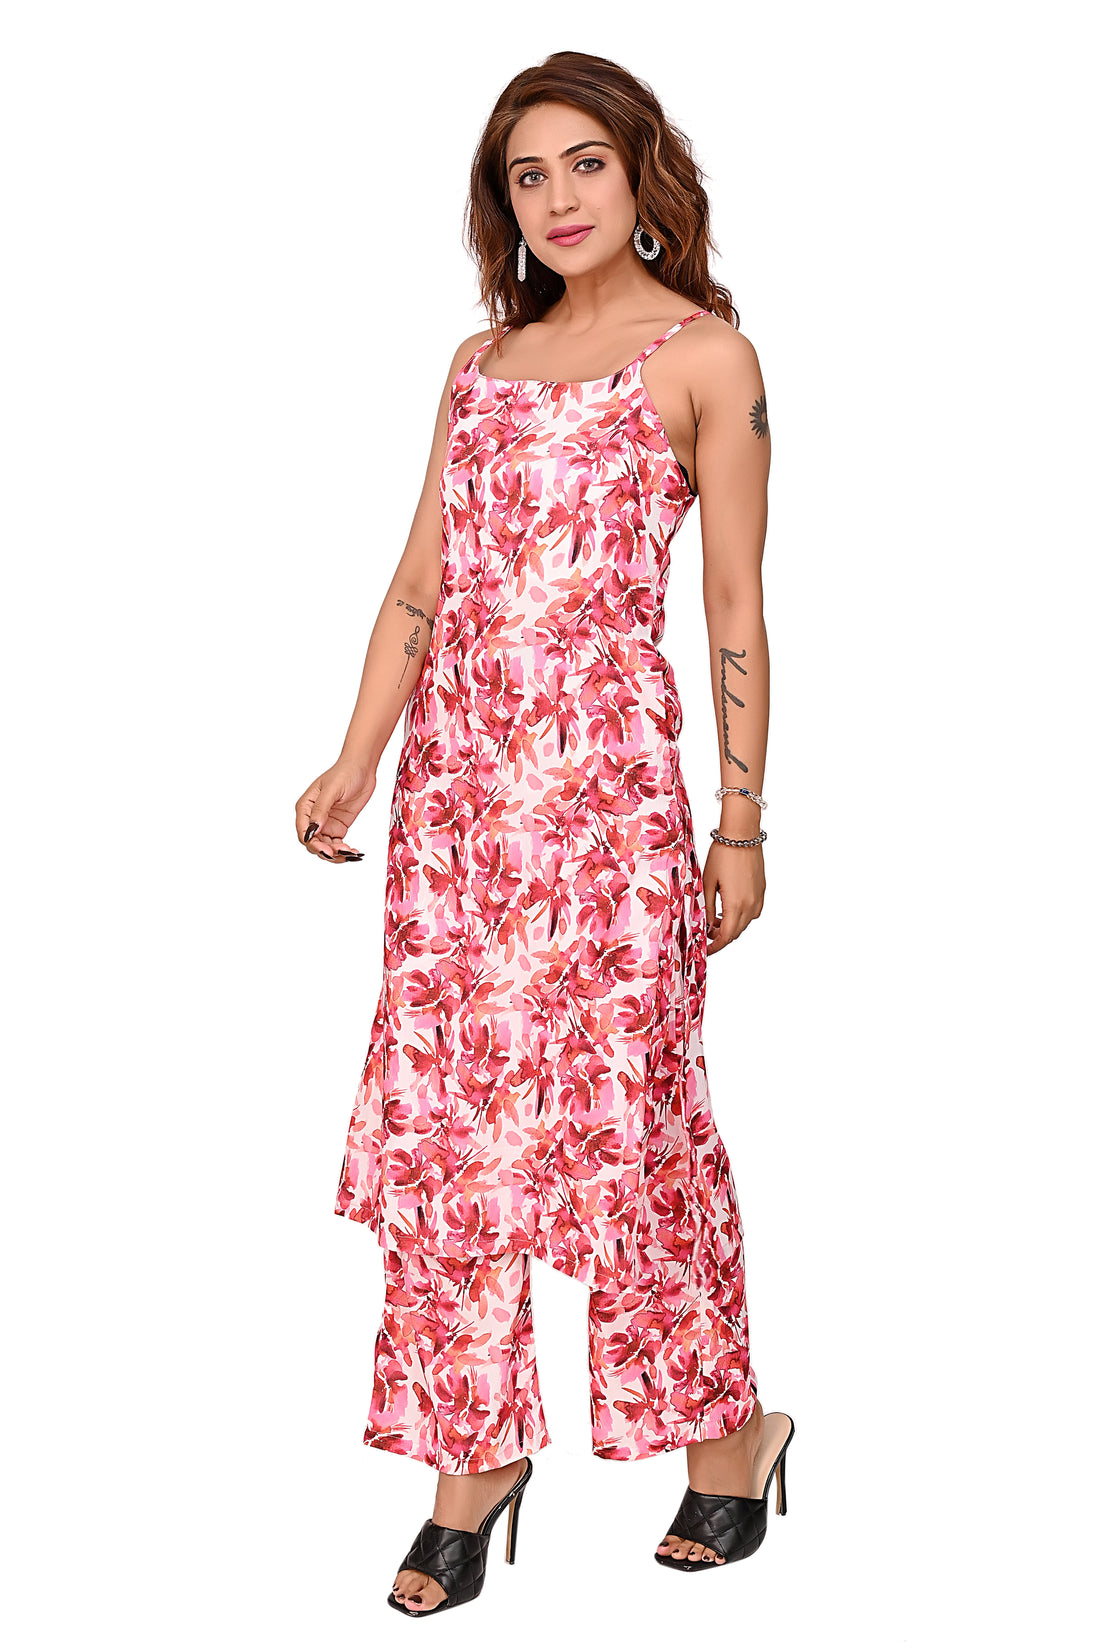 Nirmal online Premium Quality Digital Printed Tunic Dress for Women in Pink Colour